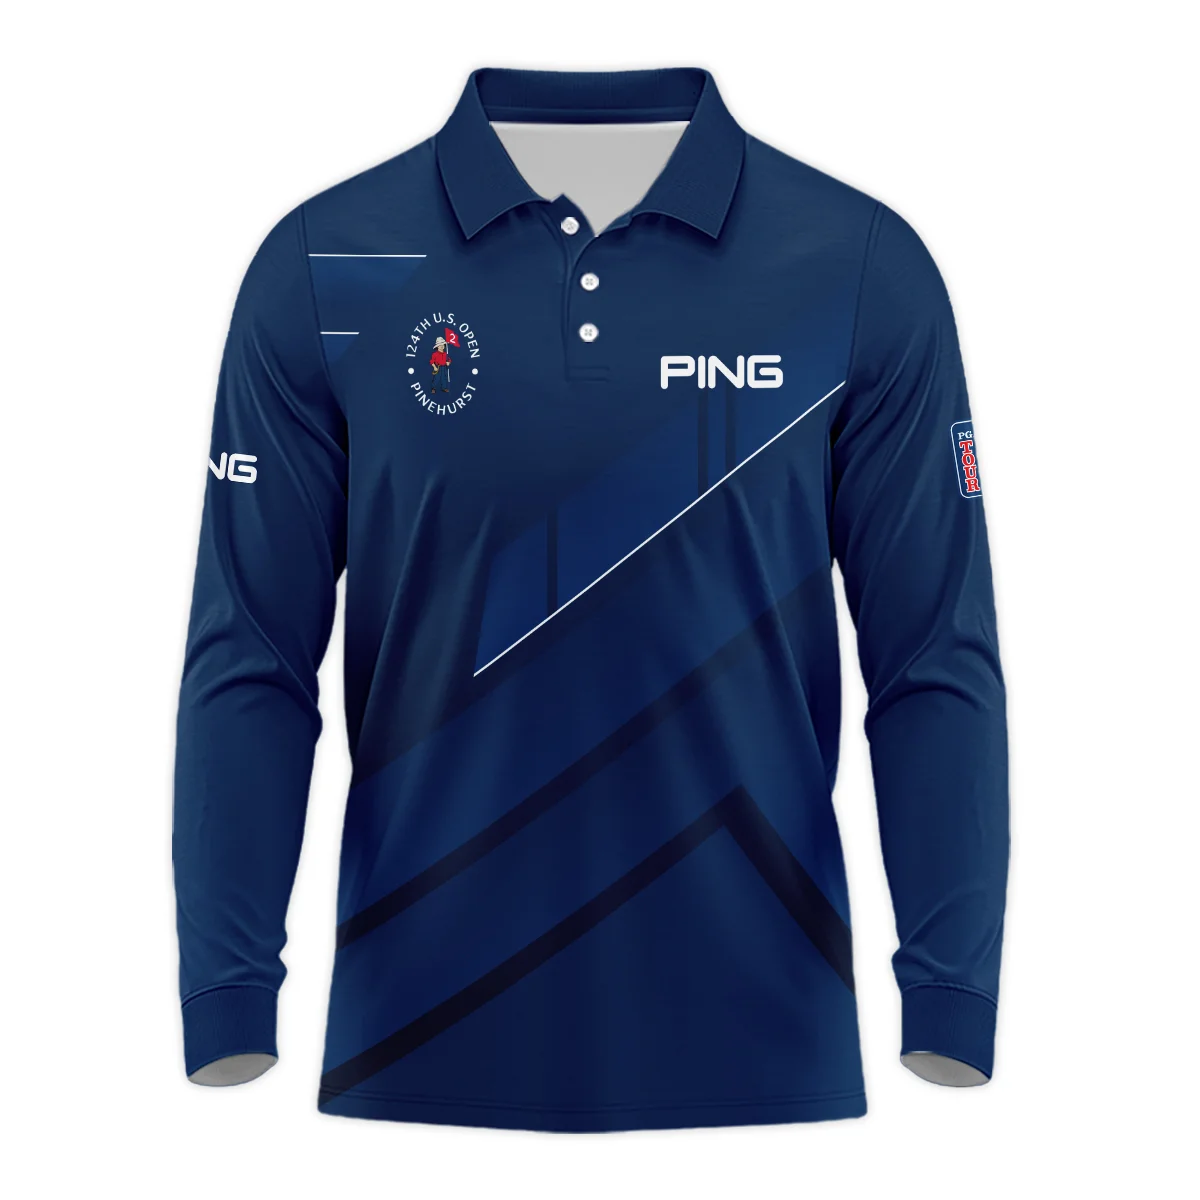 Ping 124th U.S. Open Pinehurst Blue Gradient With White Straight Line Long Polo Shirt Style Classic Long Polo Shirt For Men